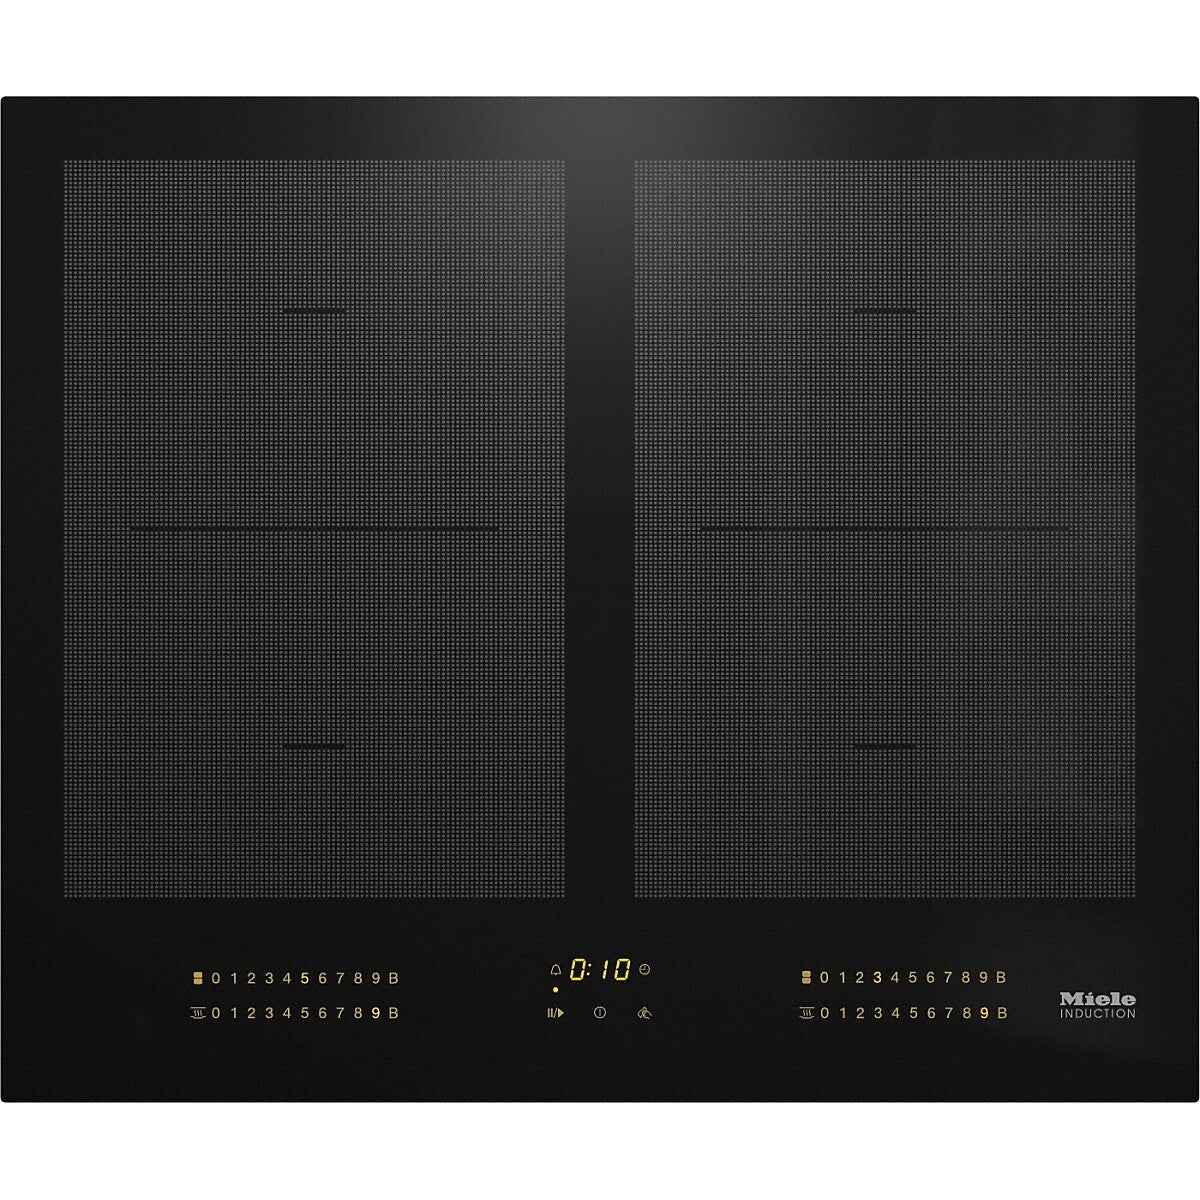 Miele 62cm Induction Hob with 2 flex cooking areas KM 7564 FL Black